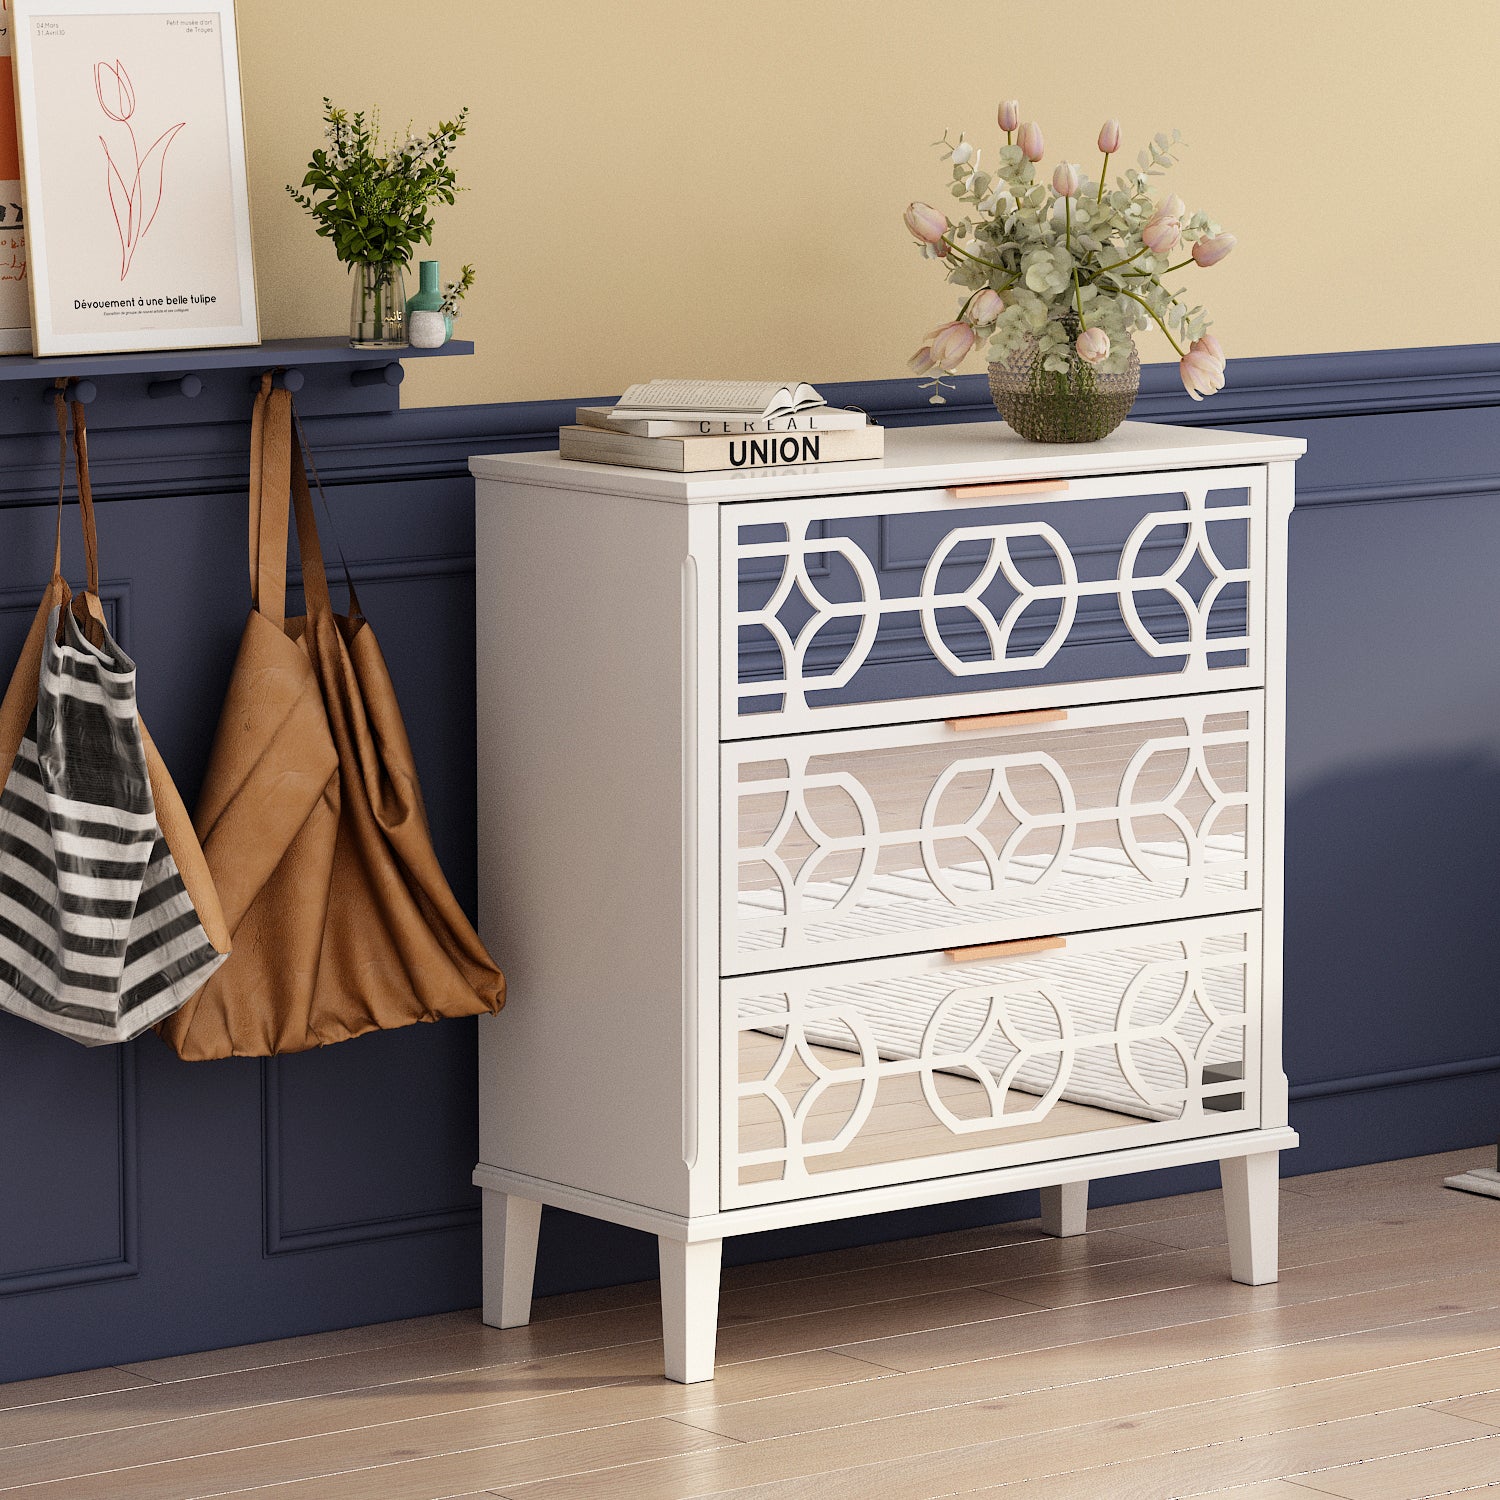 Mirrored Chest Bedroom Nightstand Sideboard with 3 Drawers